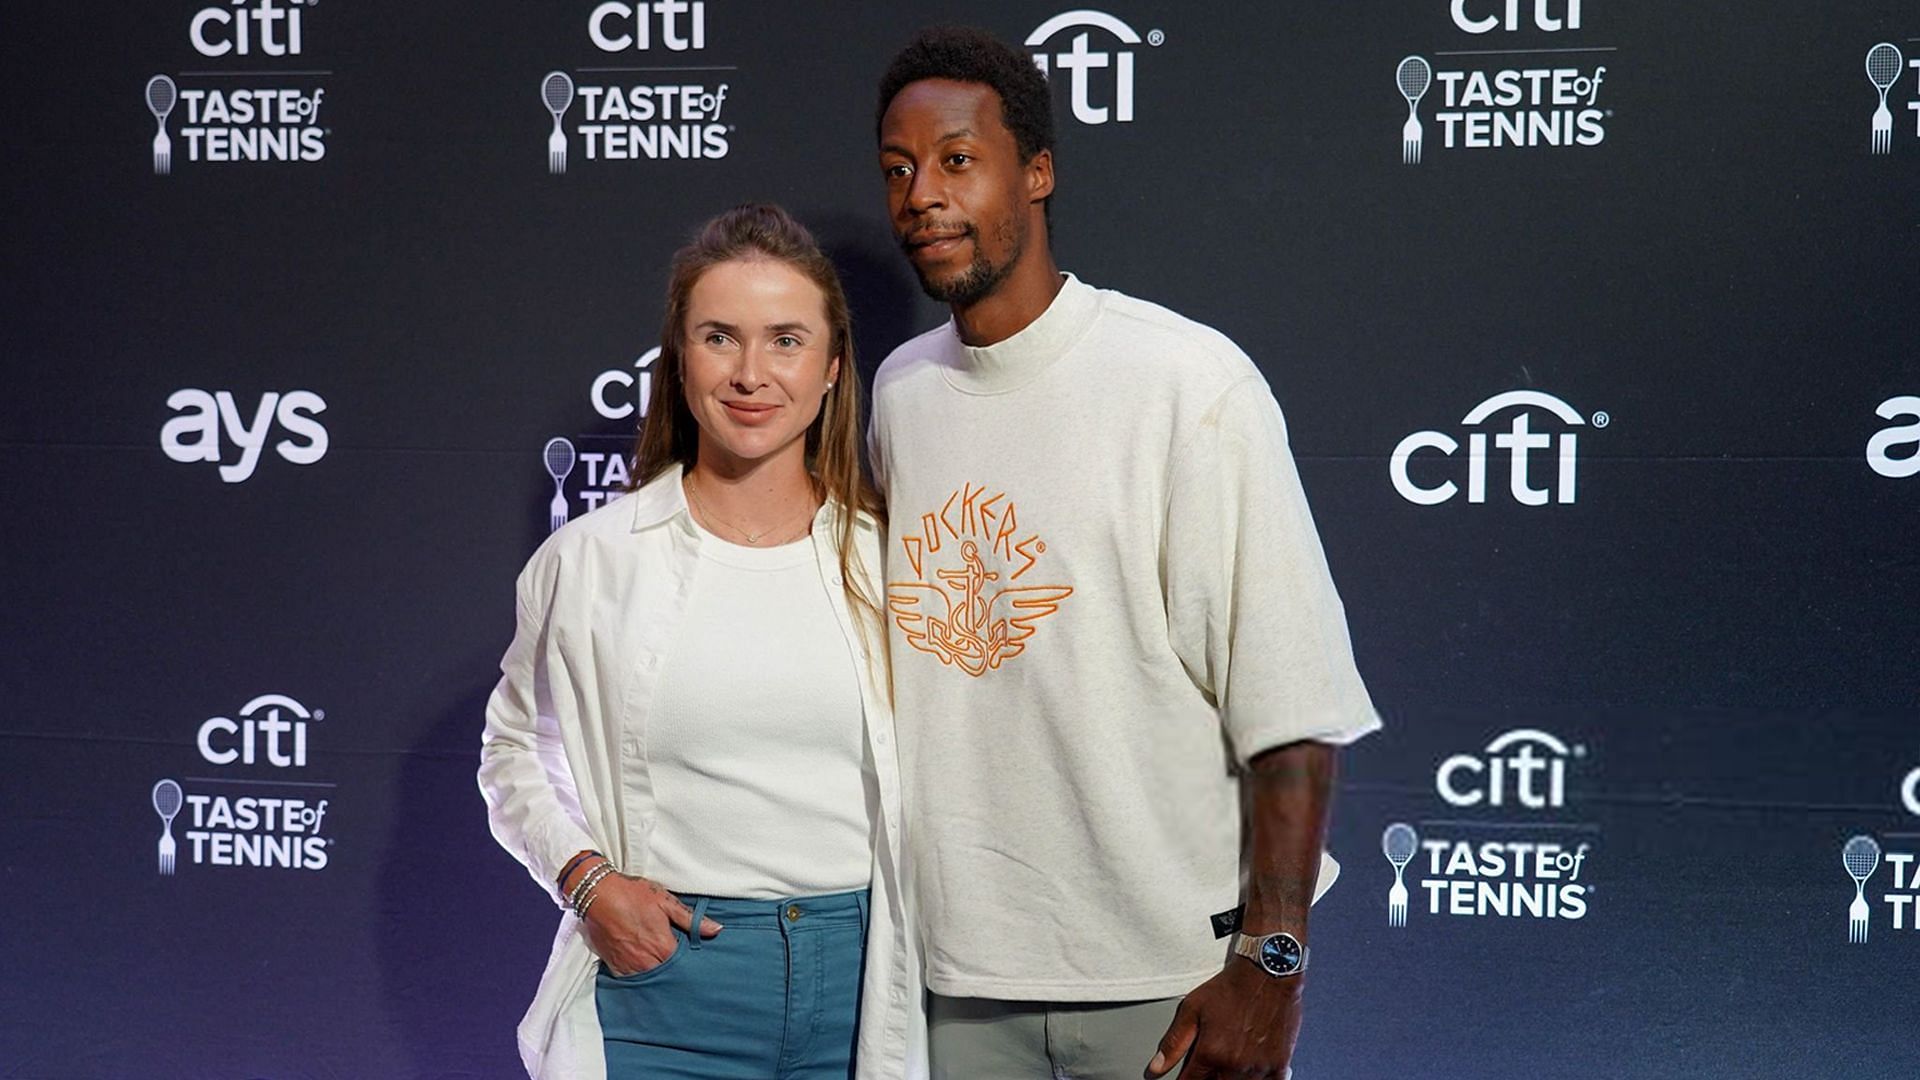 Elina Svitolina and Gael Monfils featured in a promotional campaign for renowned casual wear brand Dockers